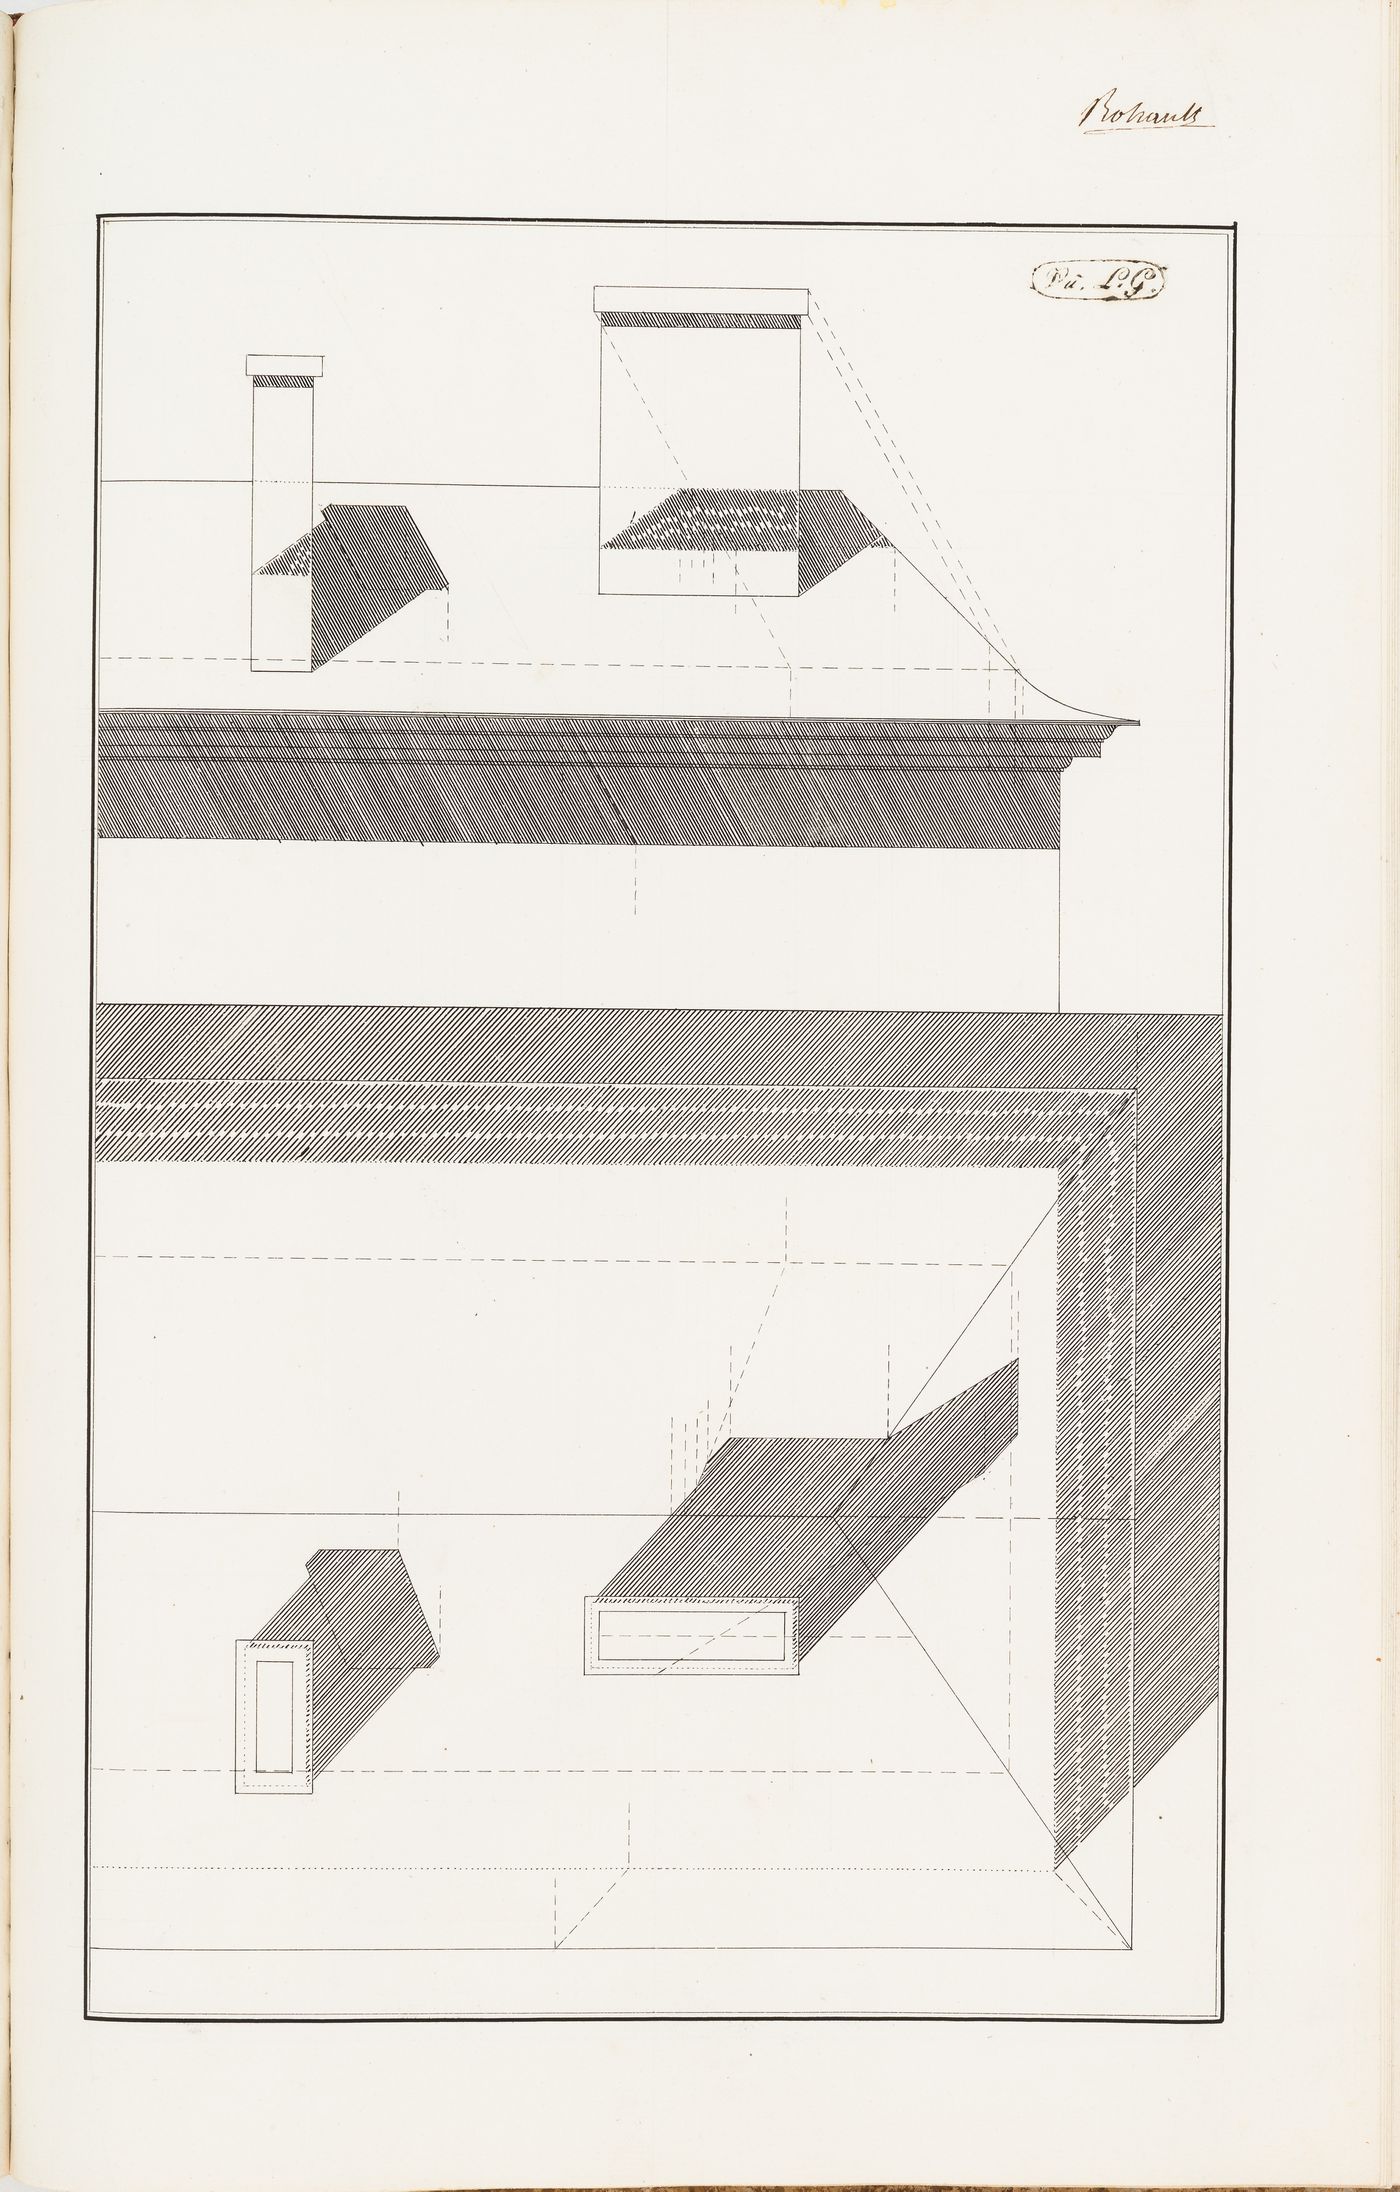 Plan and elevation for a roof, an exercise in draughting shadows